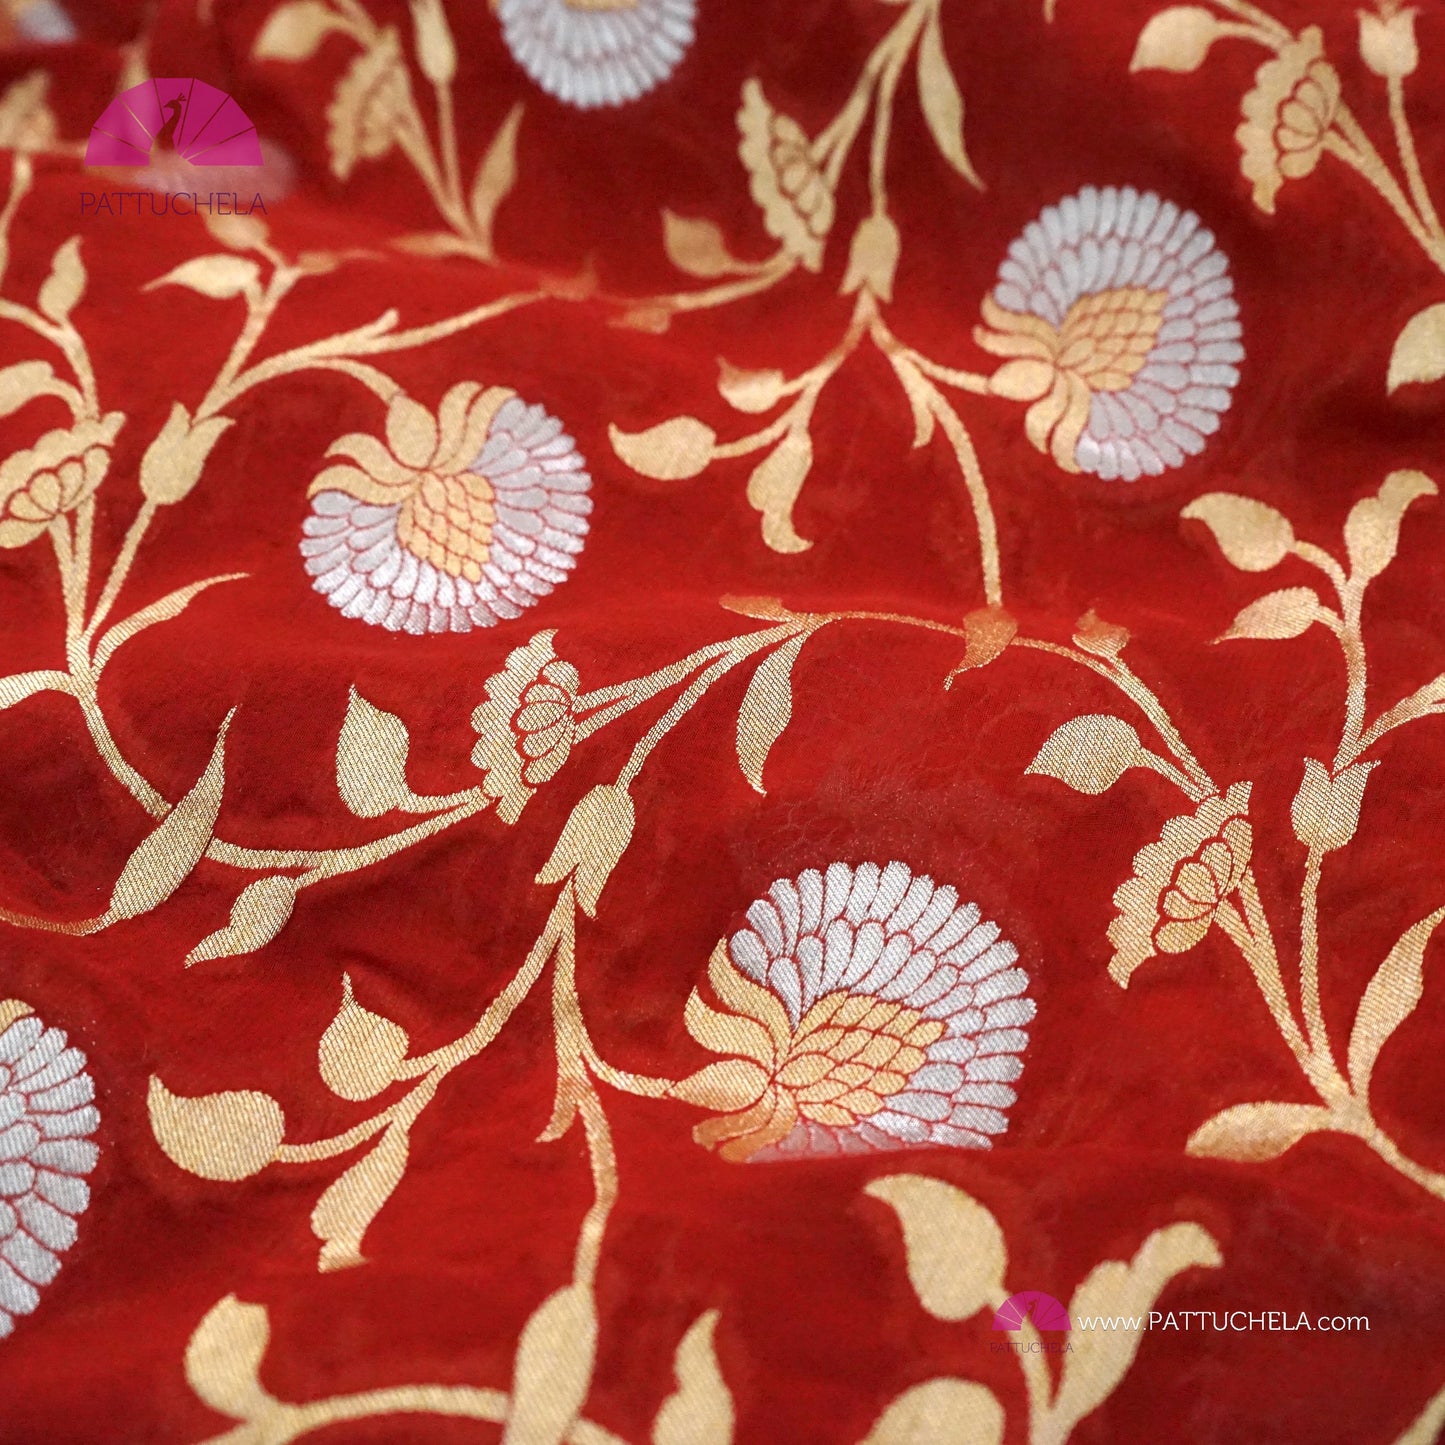 Gorgeous Banarasi Georgette Silk Saree in Red Color with Sona Rupa Jaal weaves